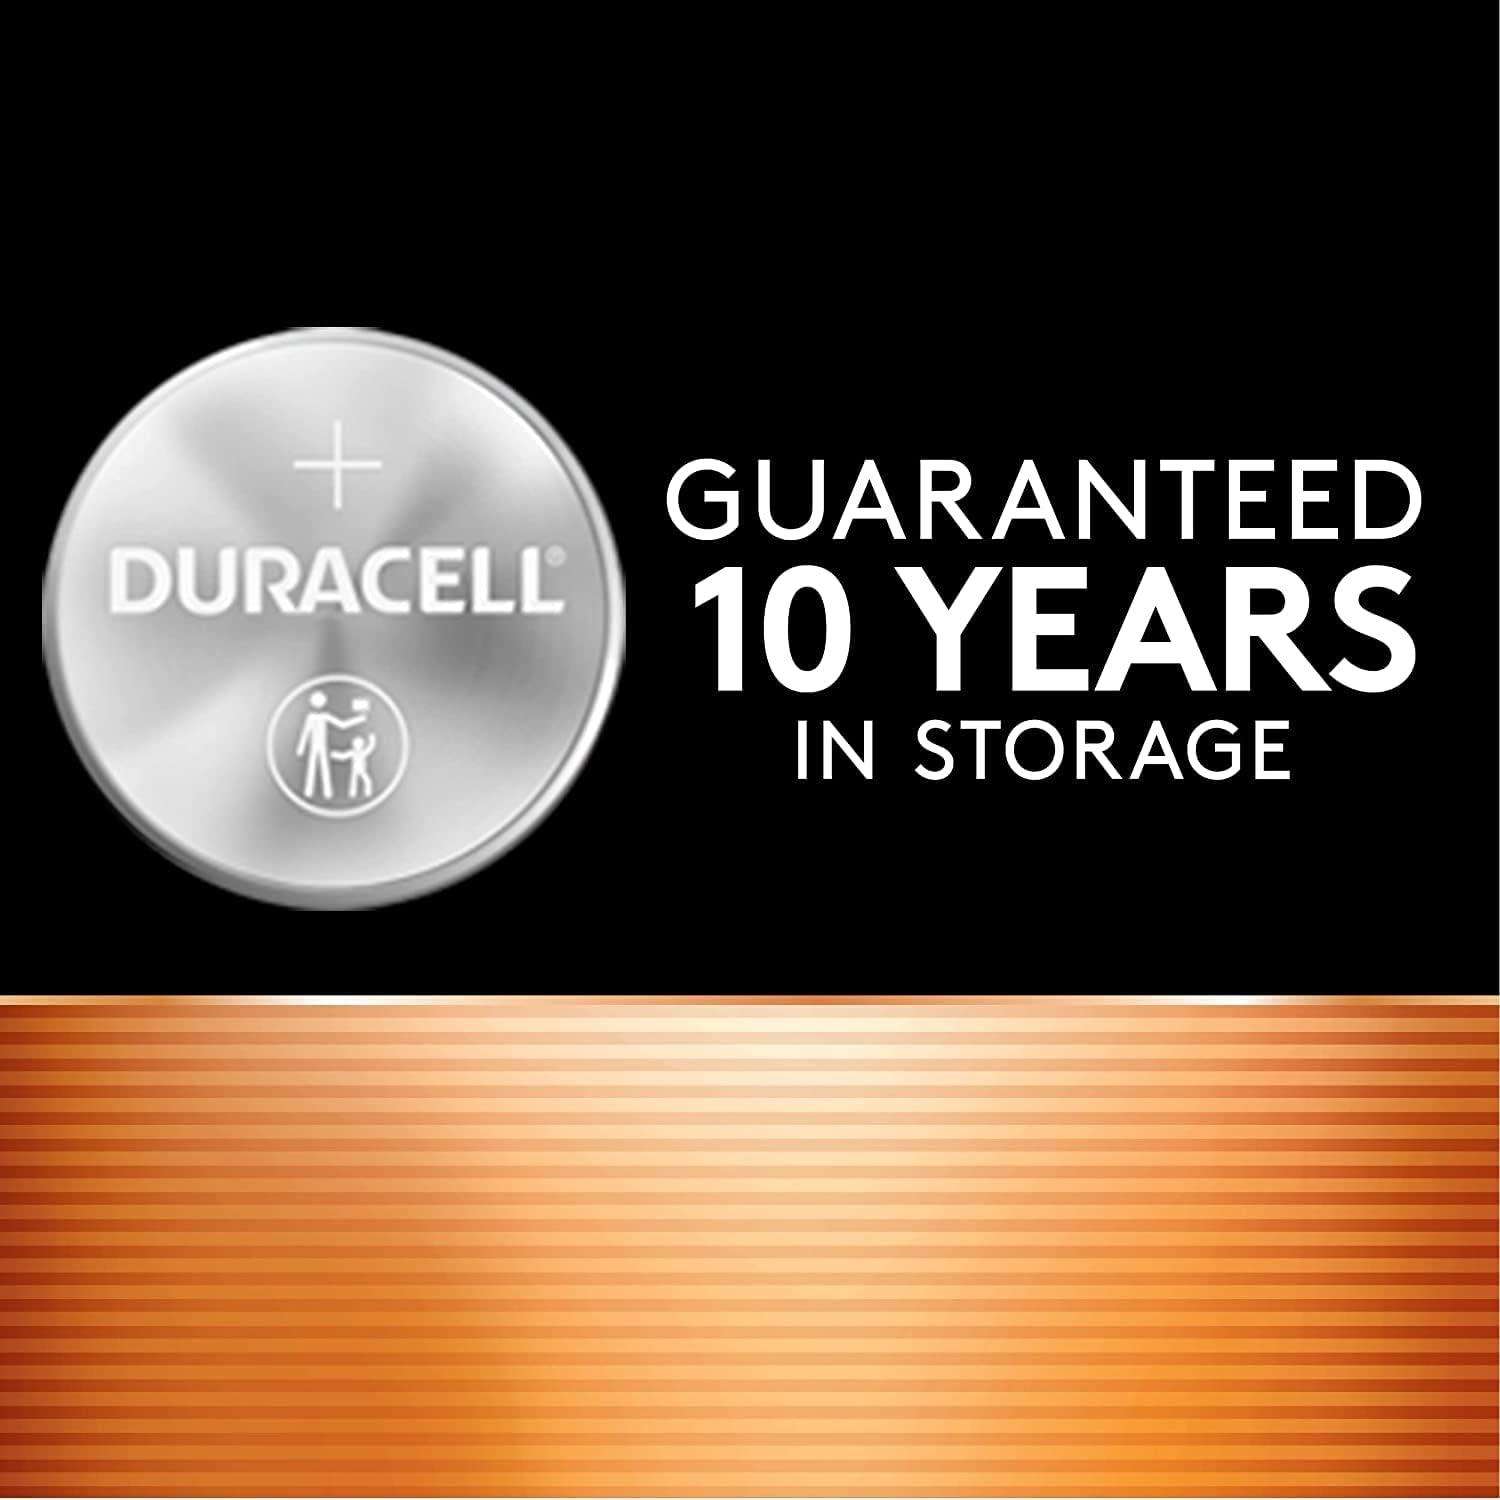 Duracell Lithium 2032 Coin Batteries, 12-count. 